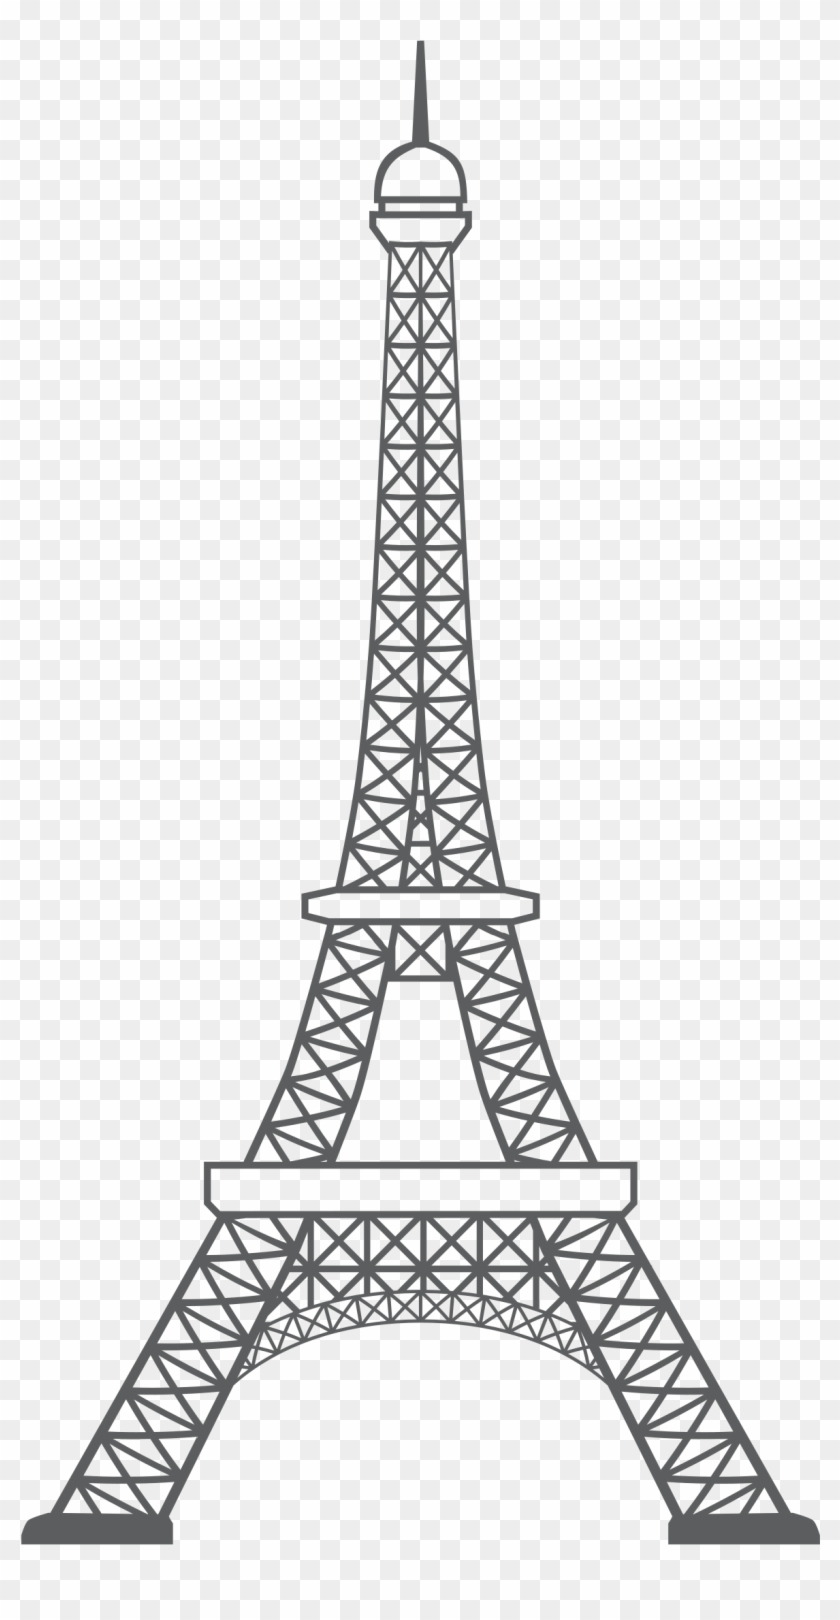 1600-x-2400-14-eiffel-tower-simple-outline-hd-png-download-1600x2400-1018106-pngfind